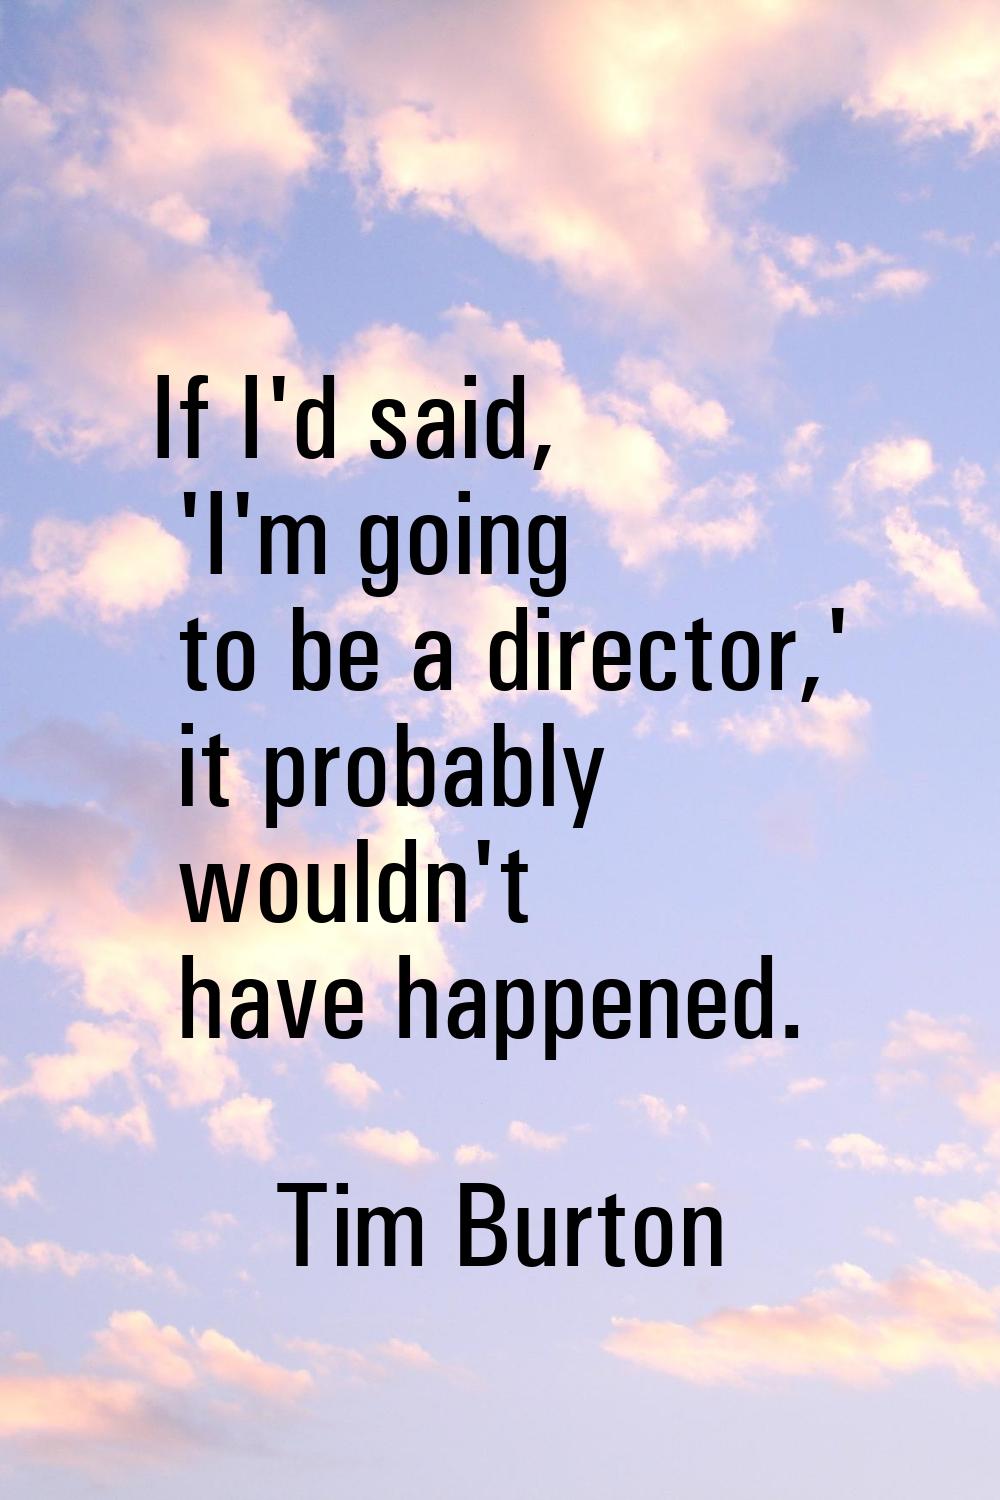 If I'd said, 'I'm going to be a director,' it probably wouldn't have happened.